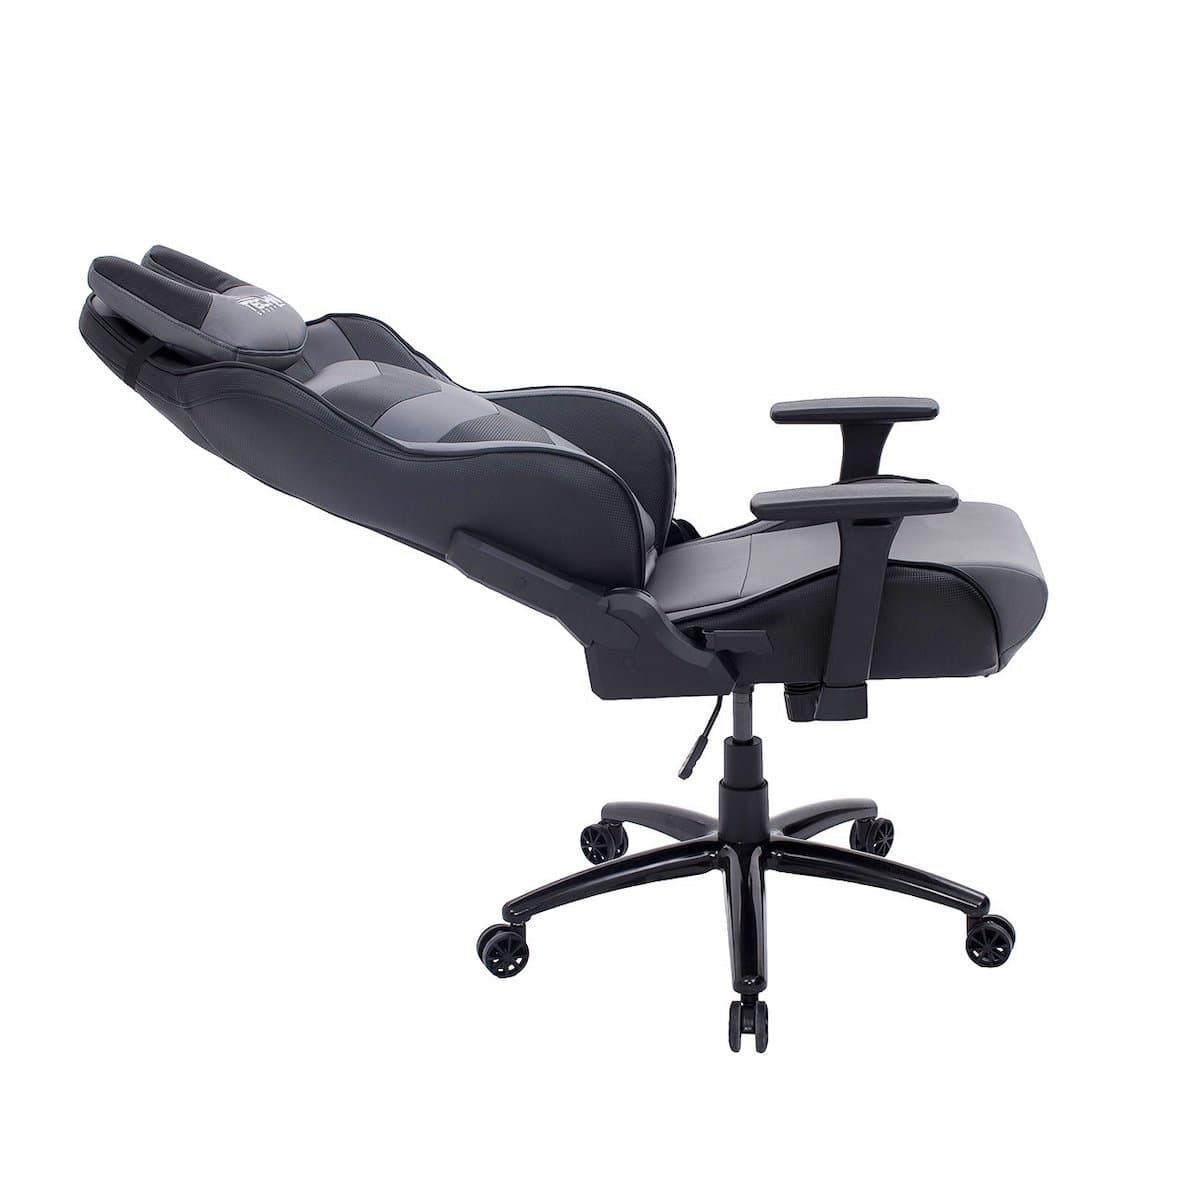 Techni Sport TS-61 Gray Ergonomic High Back Racer Style Video Gaming Chair RTA-TS61-GRY-BK Reclined #color_gray